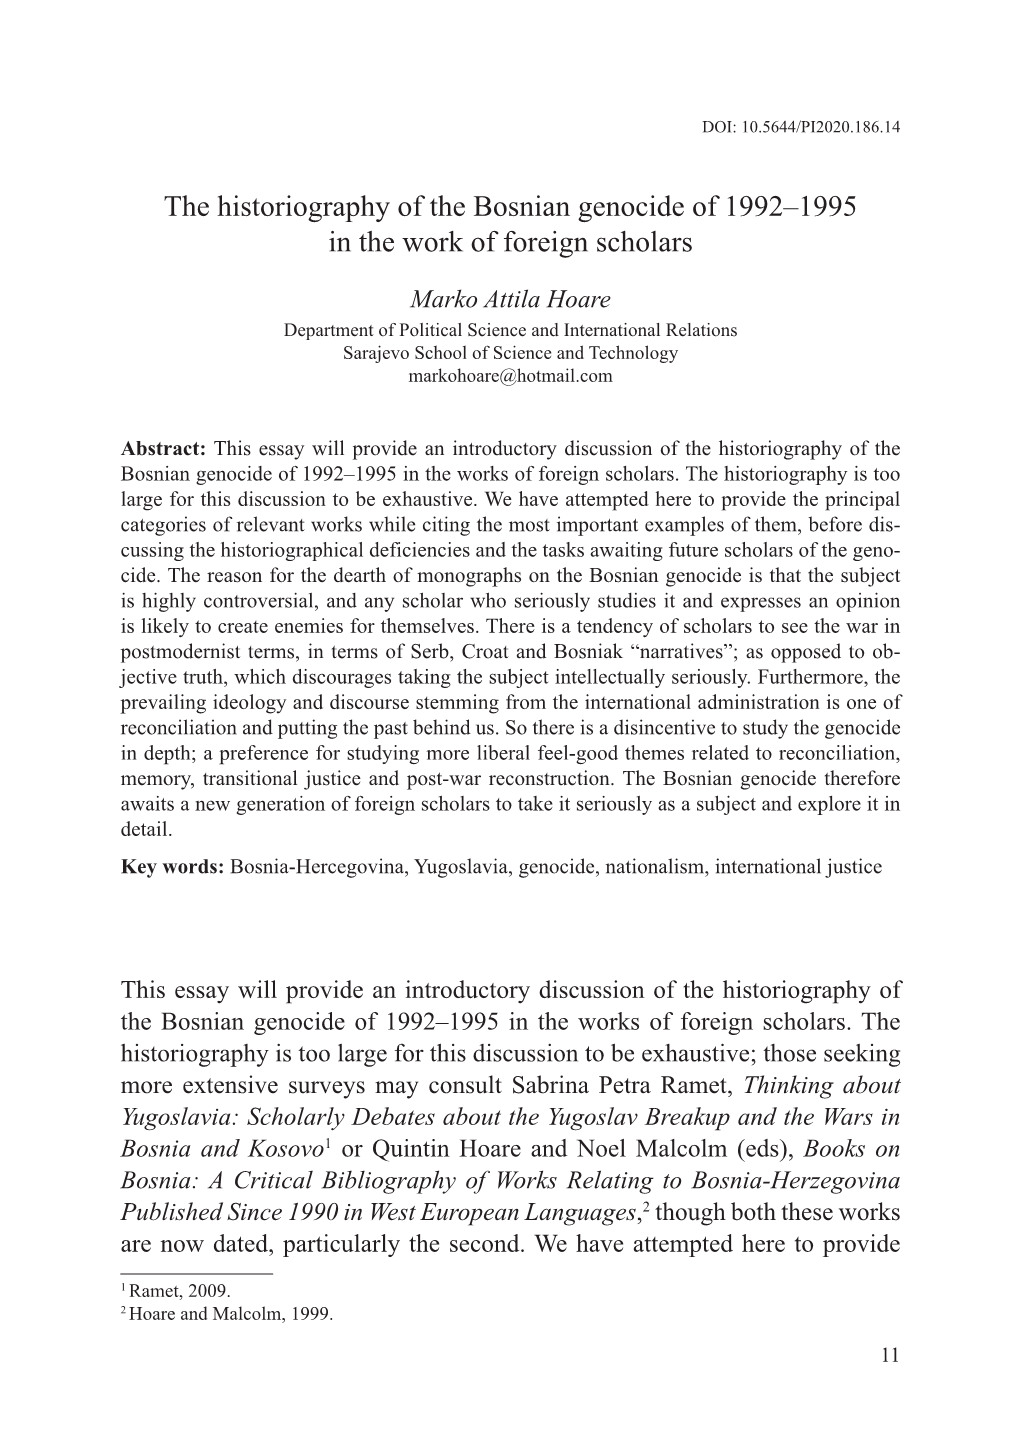 The Historiography of the Bosnian Genocide of 1992–1995 in the Work of Foreign Scholars